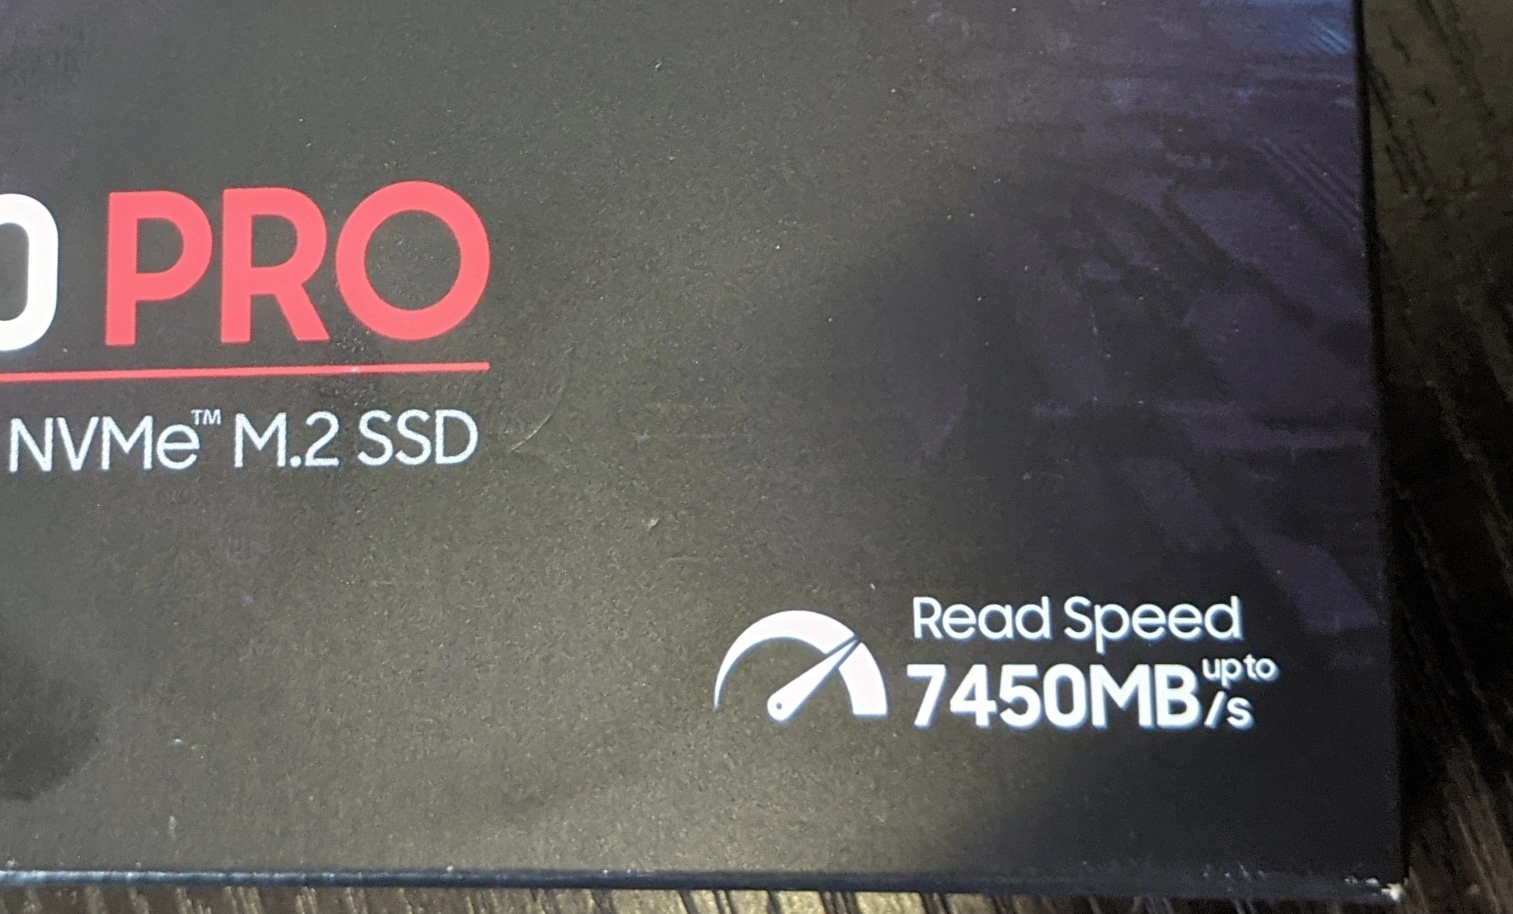 Samsung 990 Pro 4TB SSD Review - Performance. Capacity. Warranty